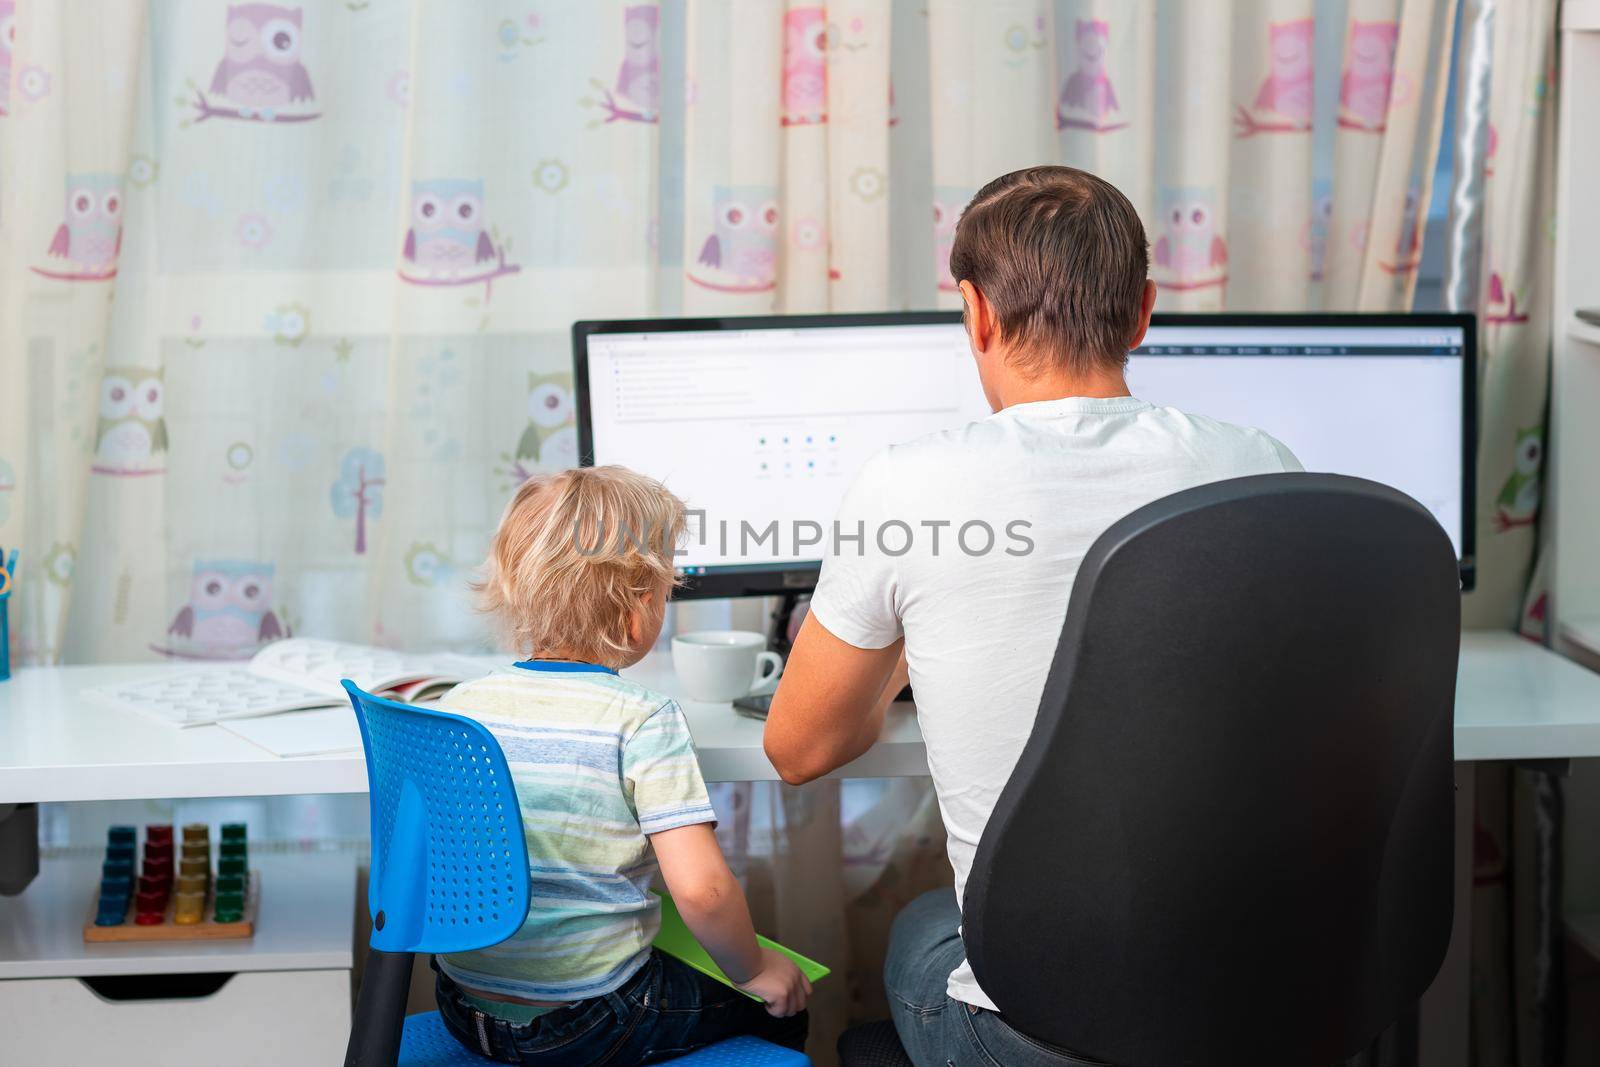 Father with kid trying to work from home during quarantine. Stay at home, work from home concept during coronavirus pandemic